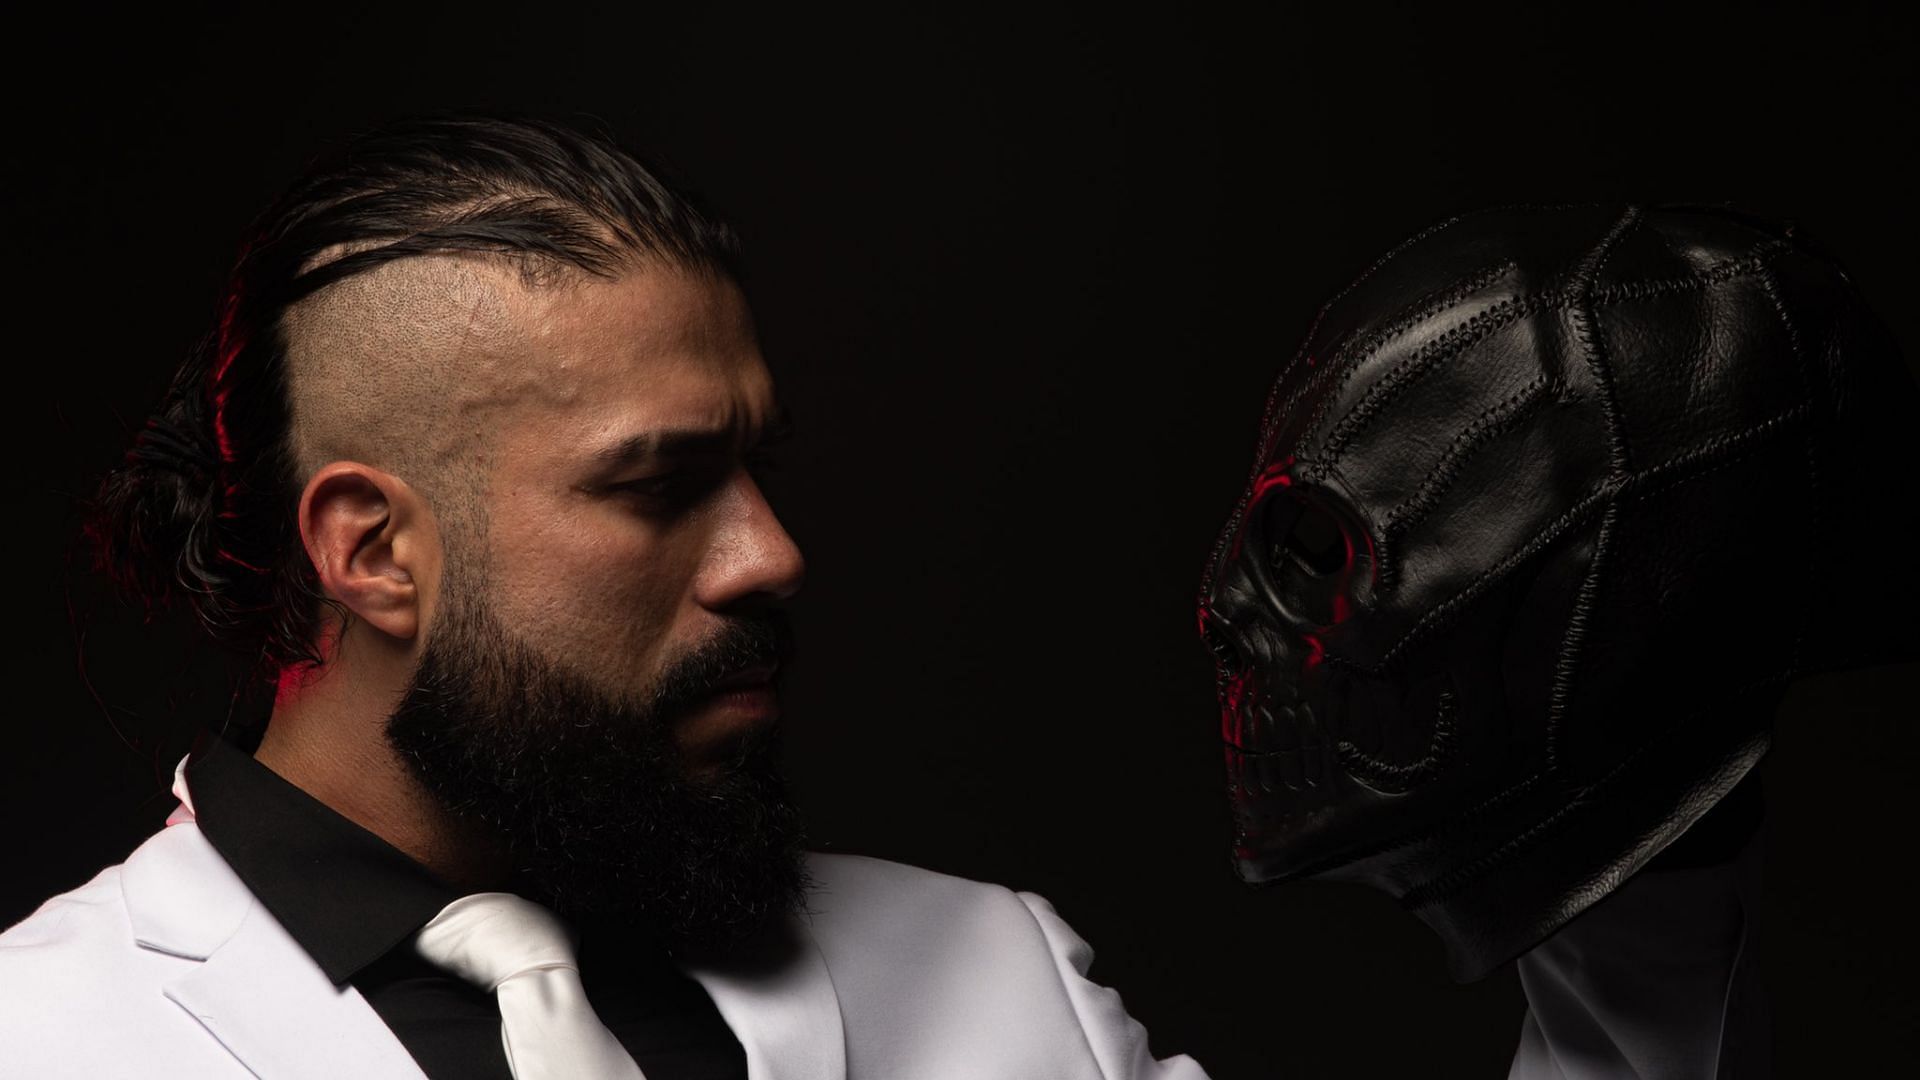 Who will Andrade El Idolo bring into his AEW stable?